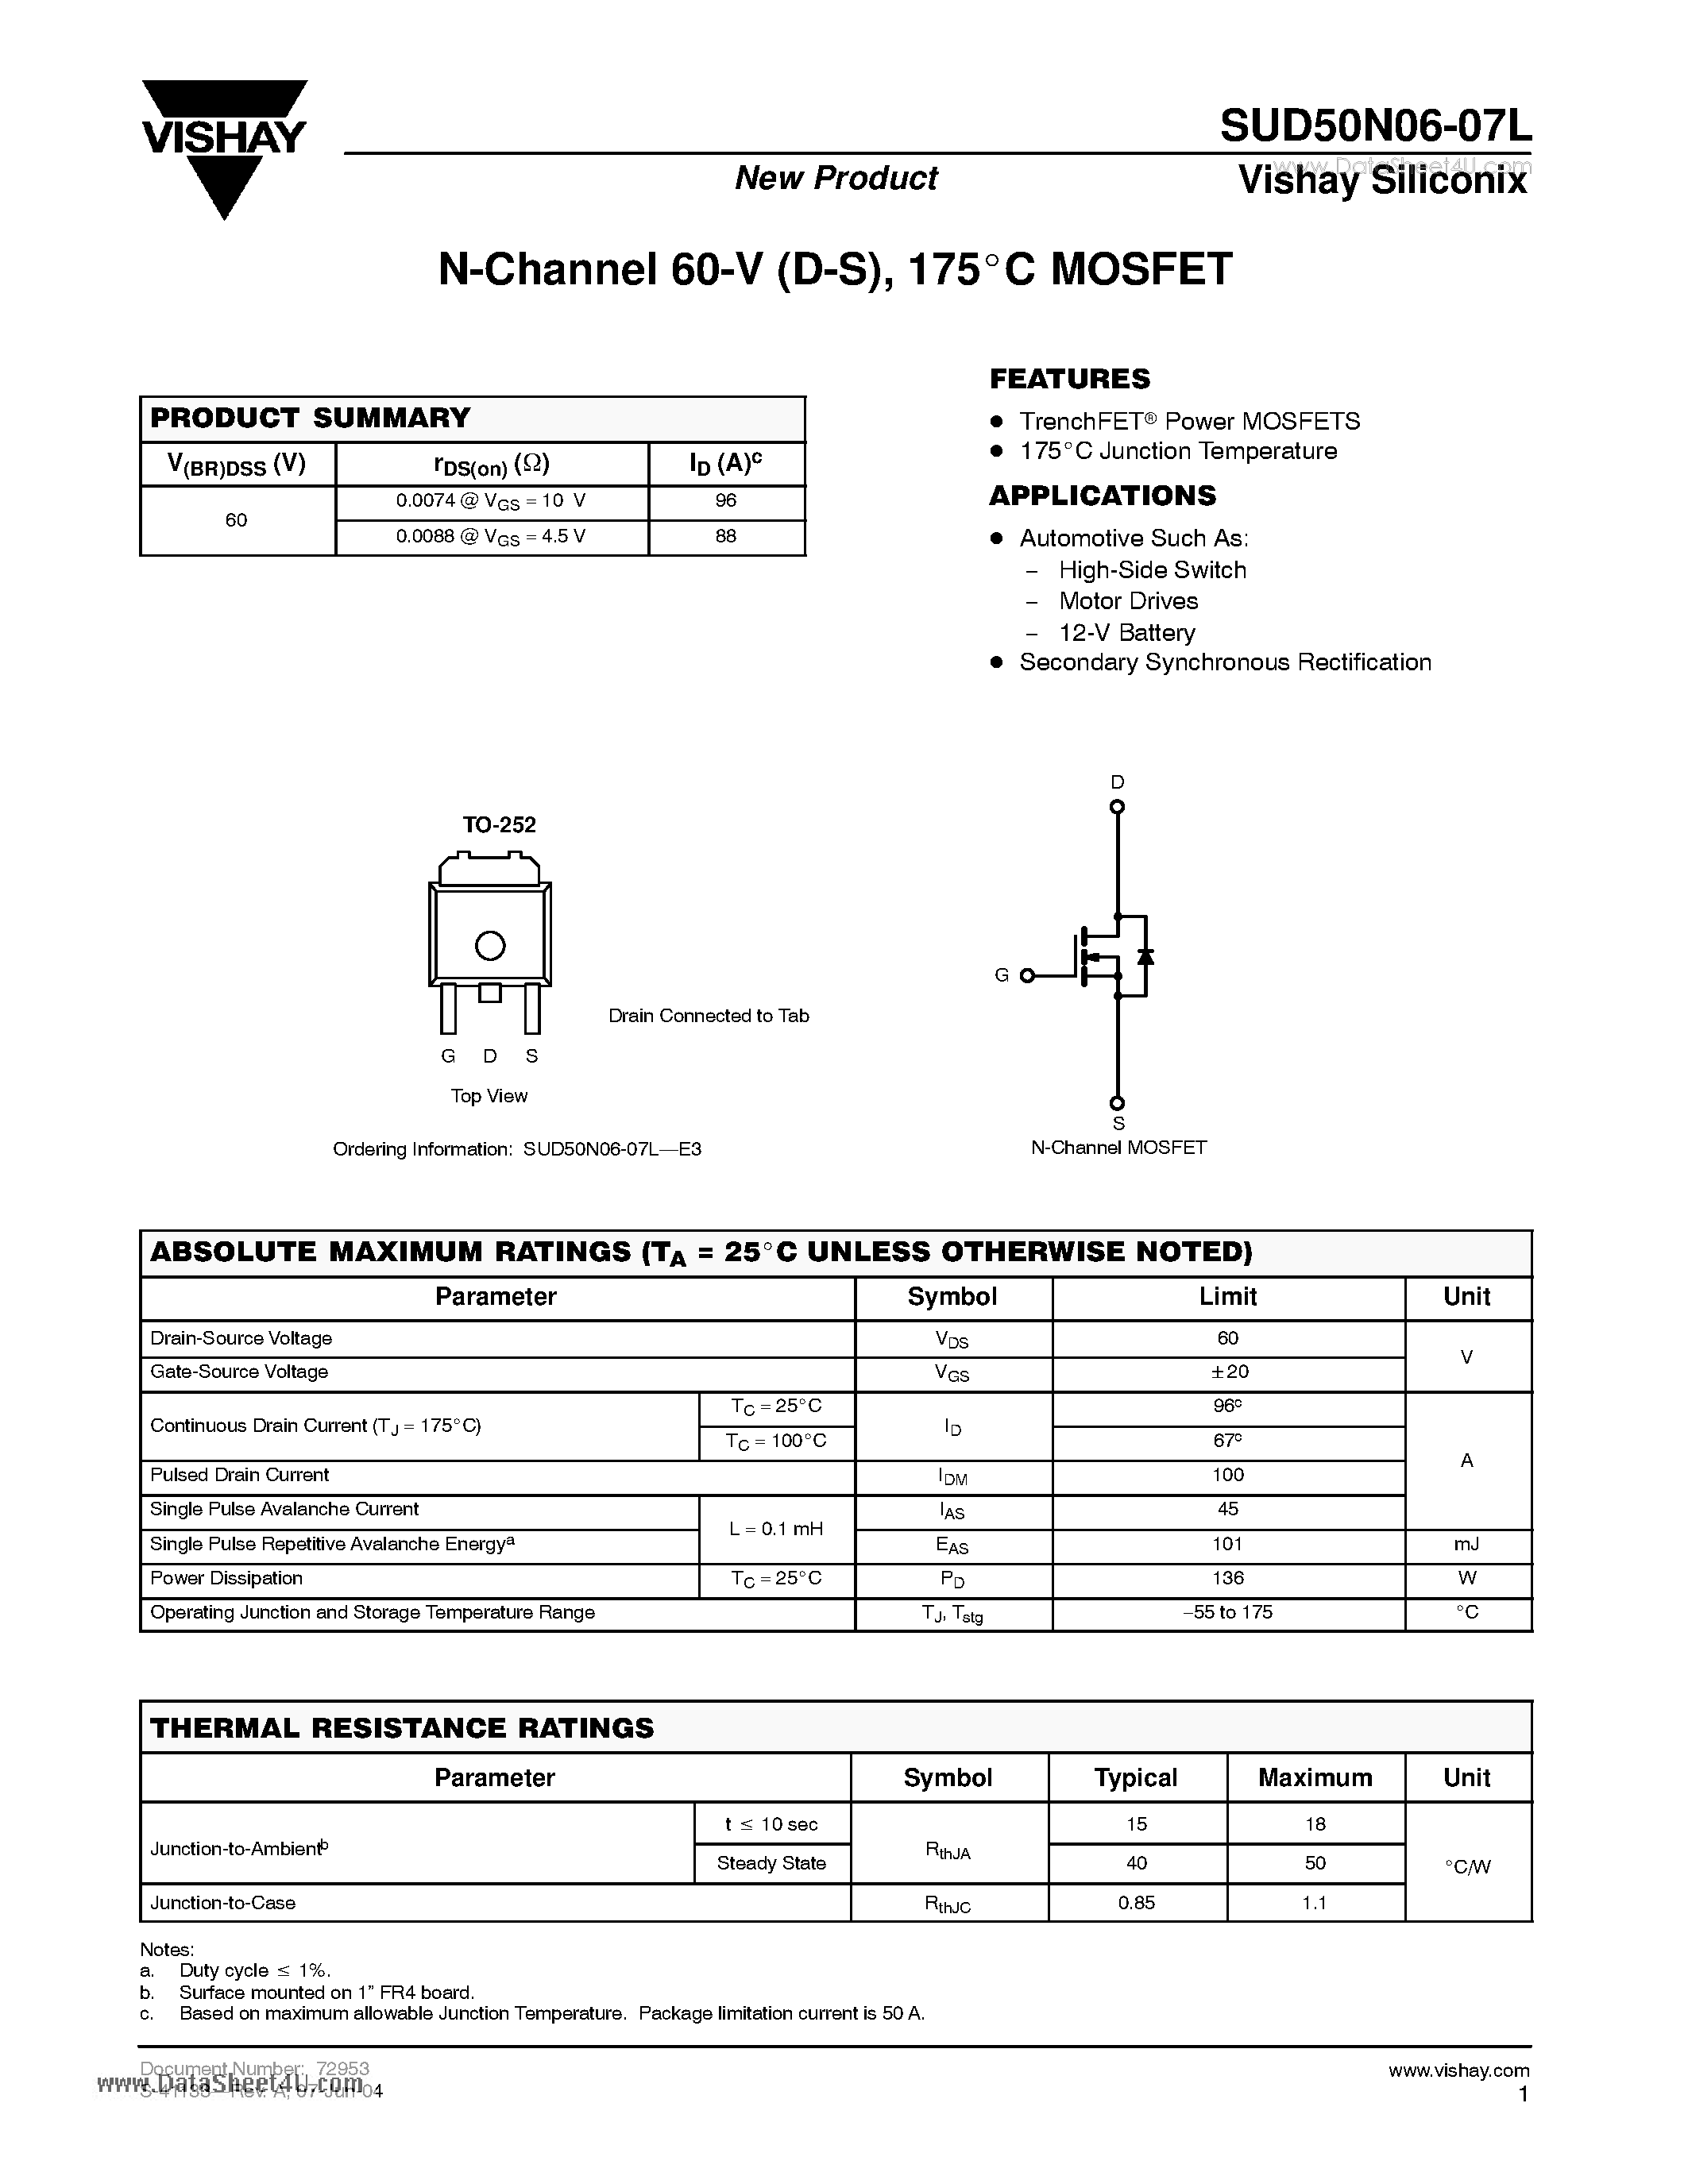 Datasheet SUD50N06-07L - N-Channel 60-V (D-S) 175 C MOSFET page 1